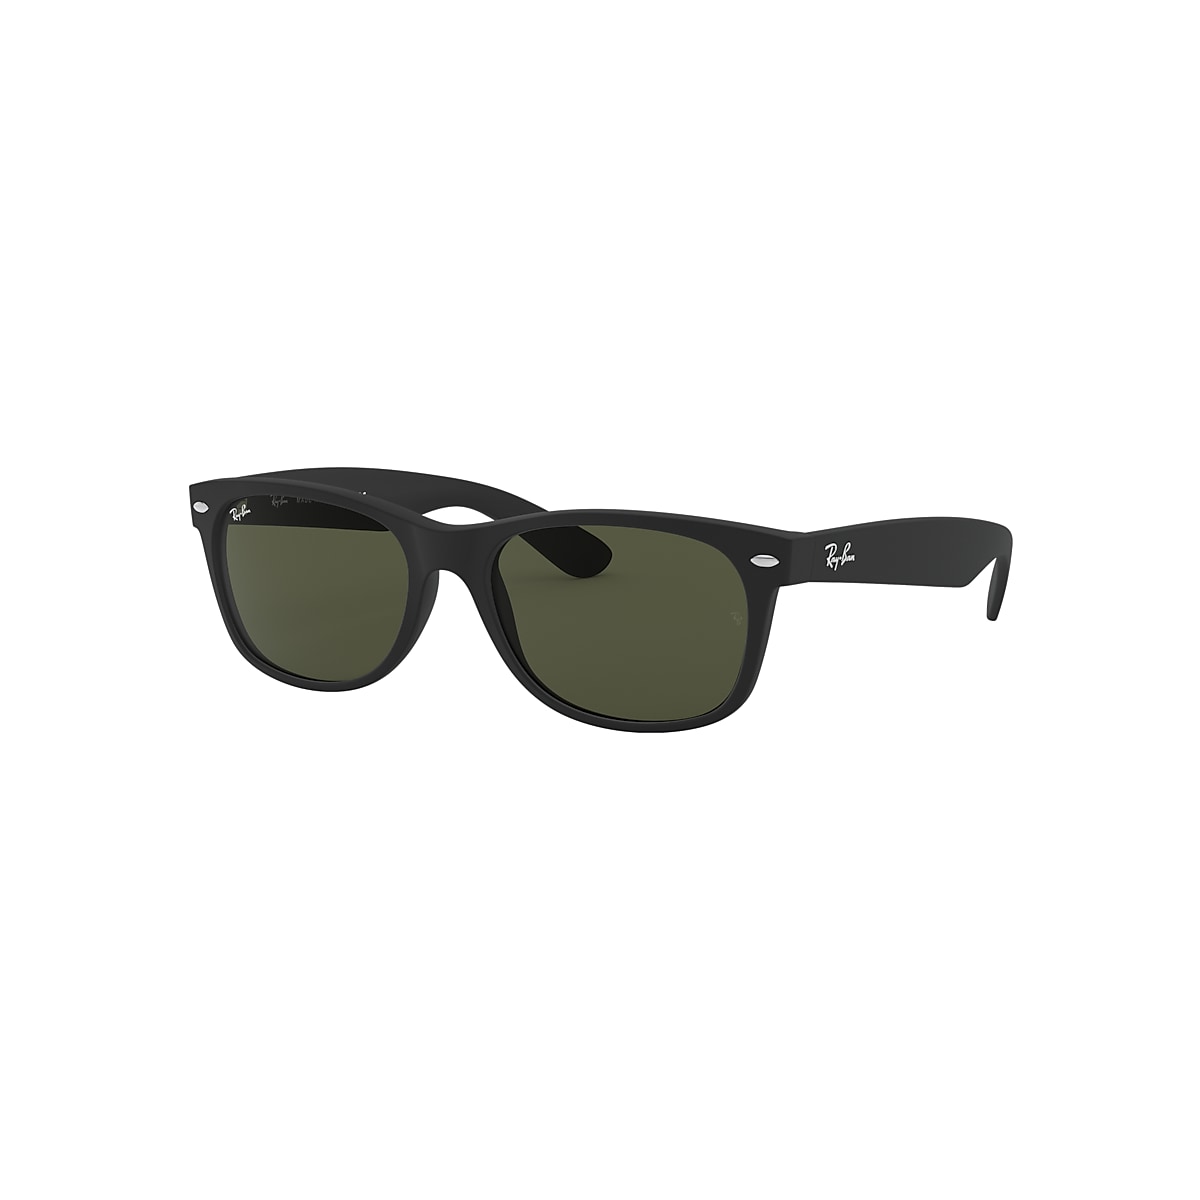 Entrelazamiento Repetido marca New Wayfarer Classic Sunglasses in Black and Green - RB2132 | Ray-Ban® US